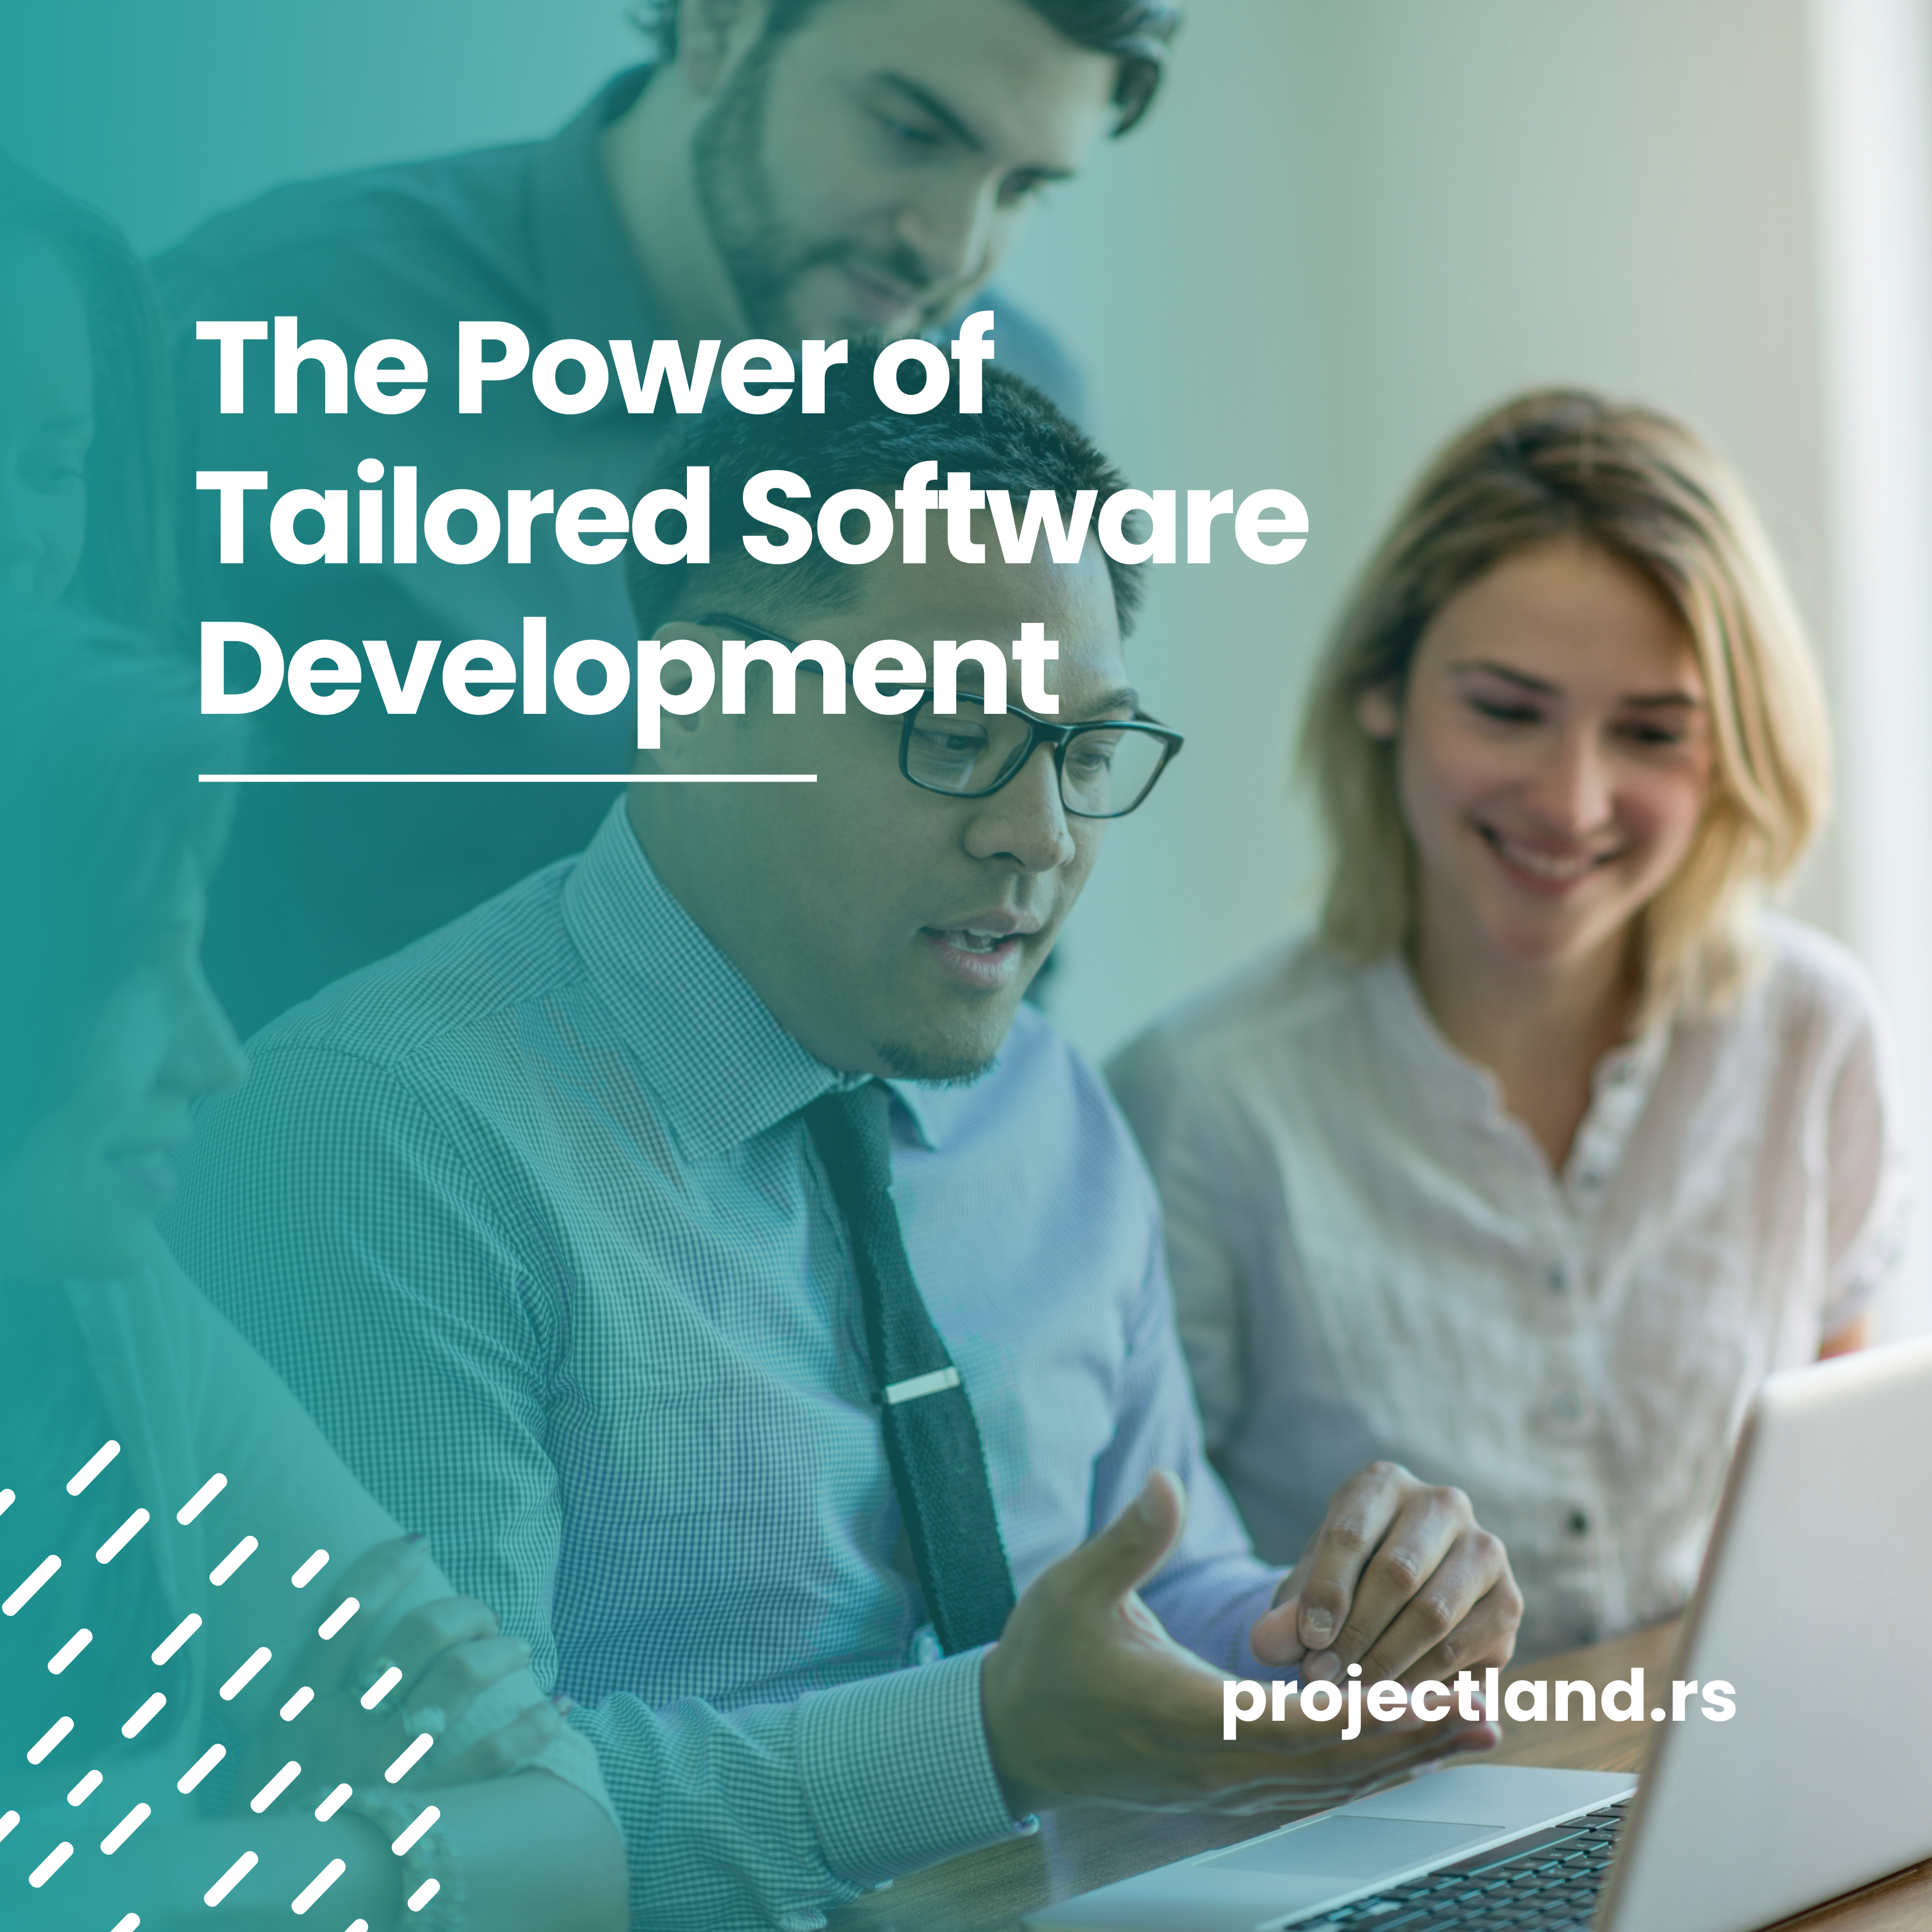 The Power of Tailored Software Development